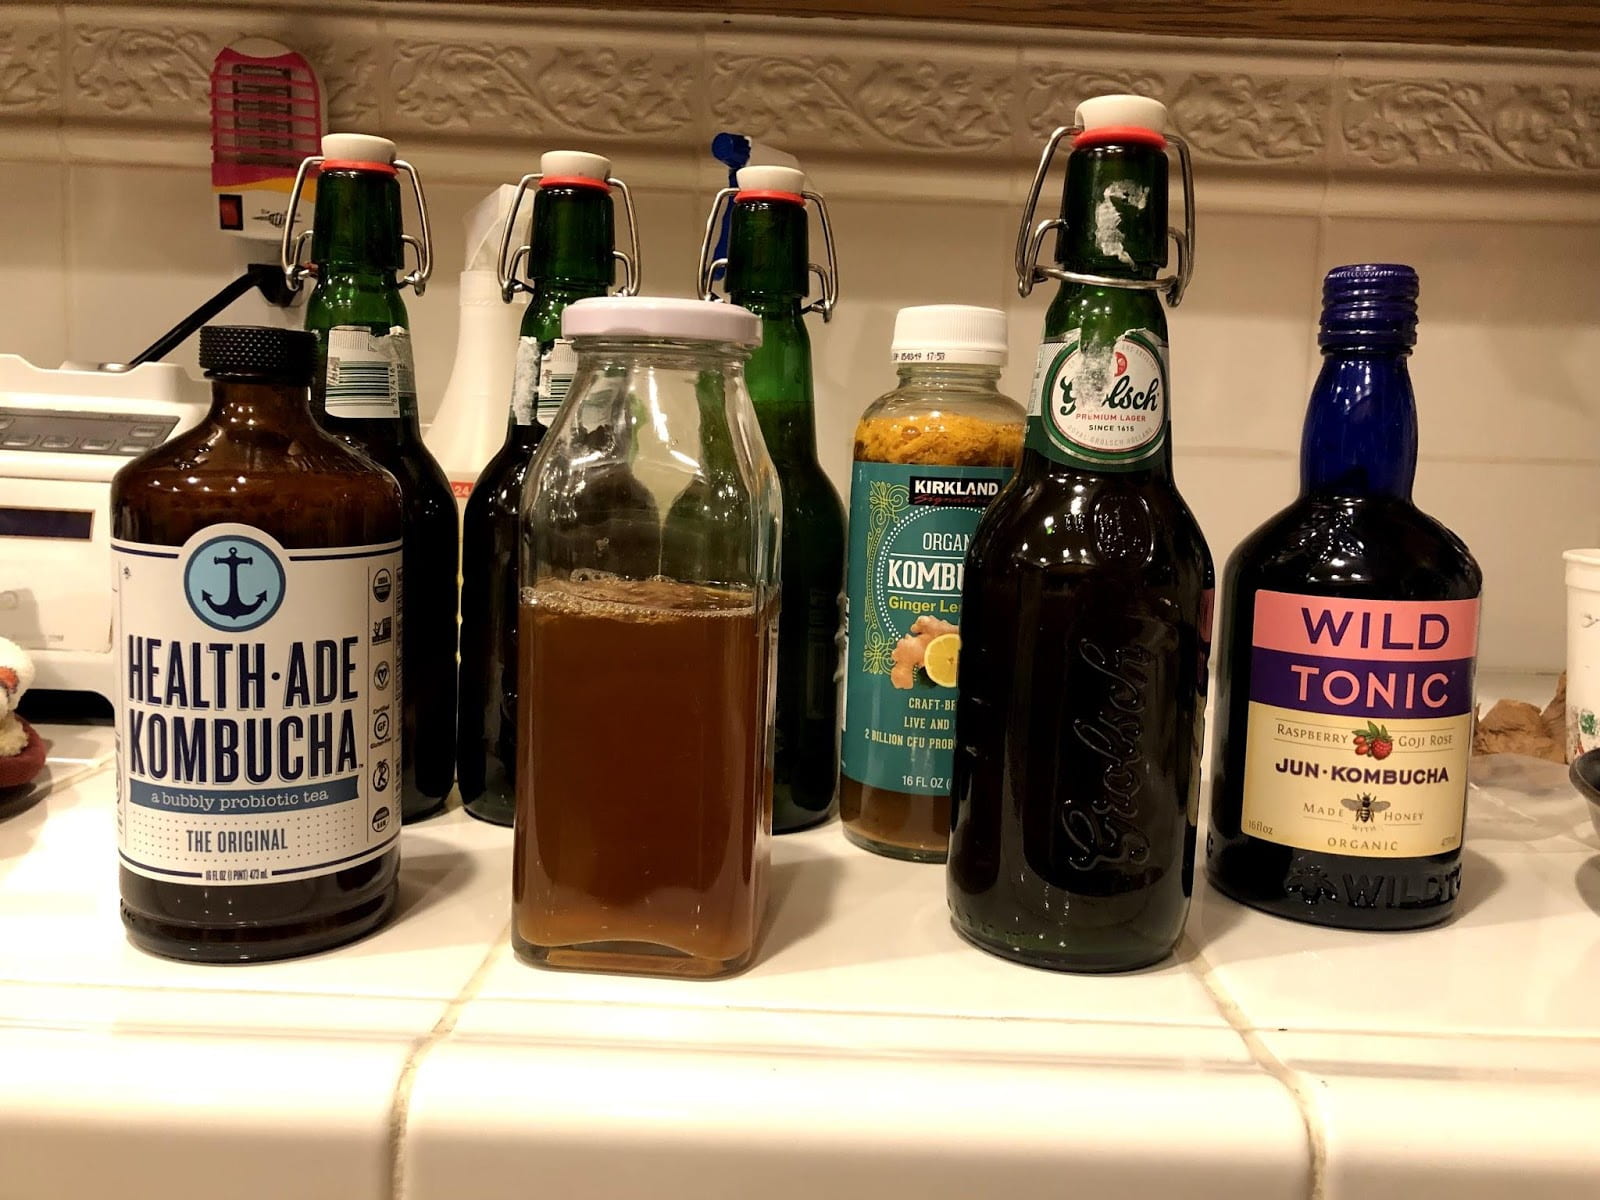 All ingredients required for the second kombucha fermentation.